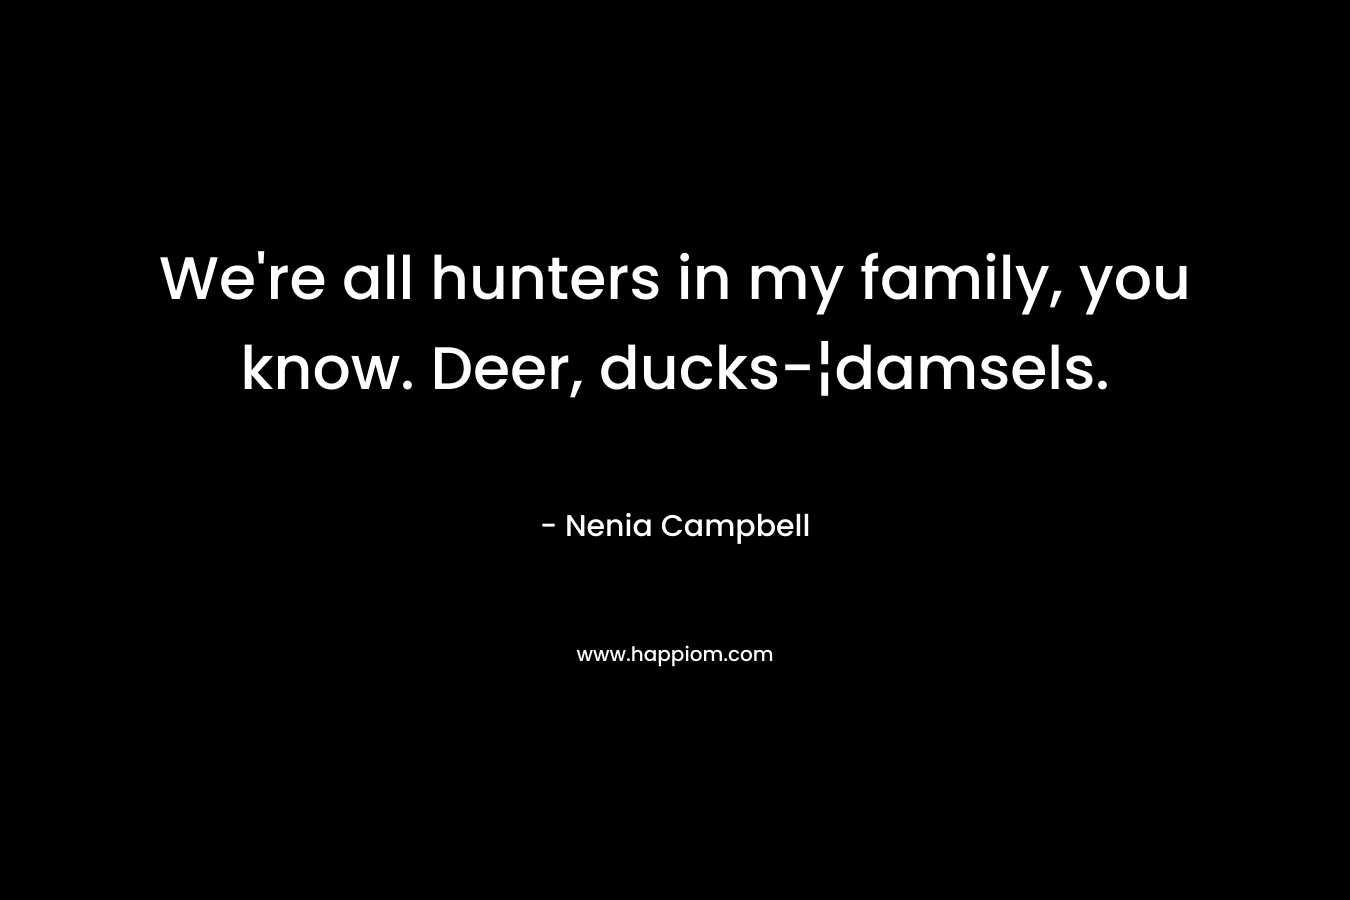 We're all hunters in my family, you know. Deer, ducks-¦damsels.